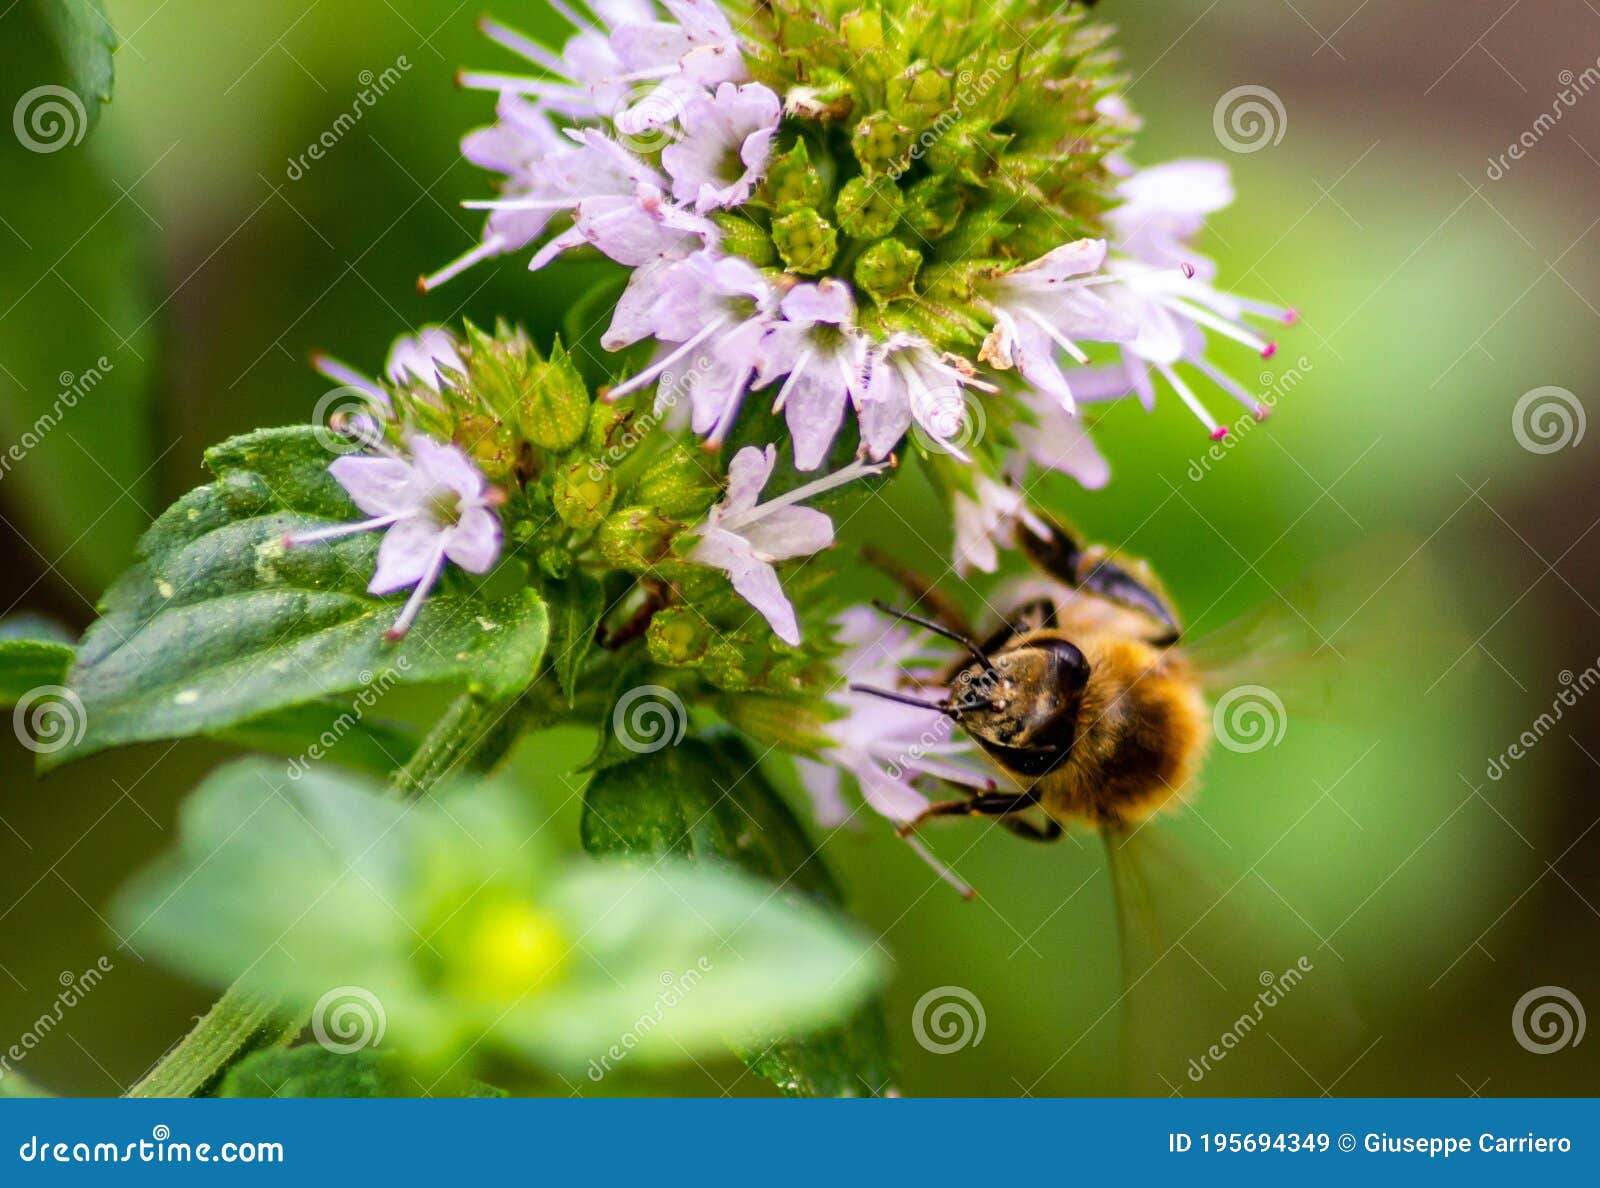 a laborious bee that collects nectar from mint flowers contributes to the pollination of flowers.